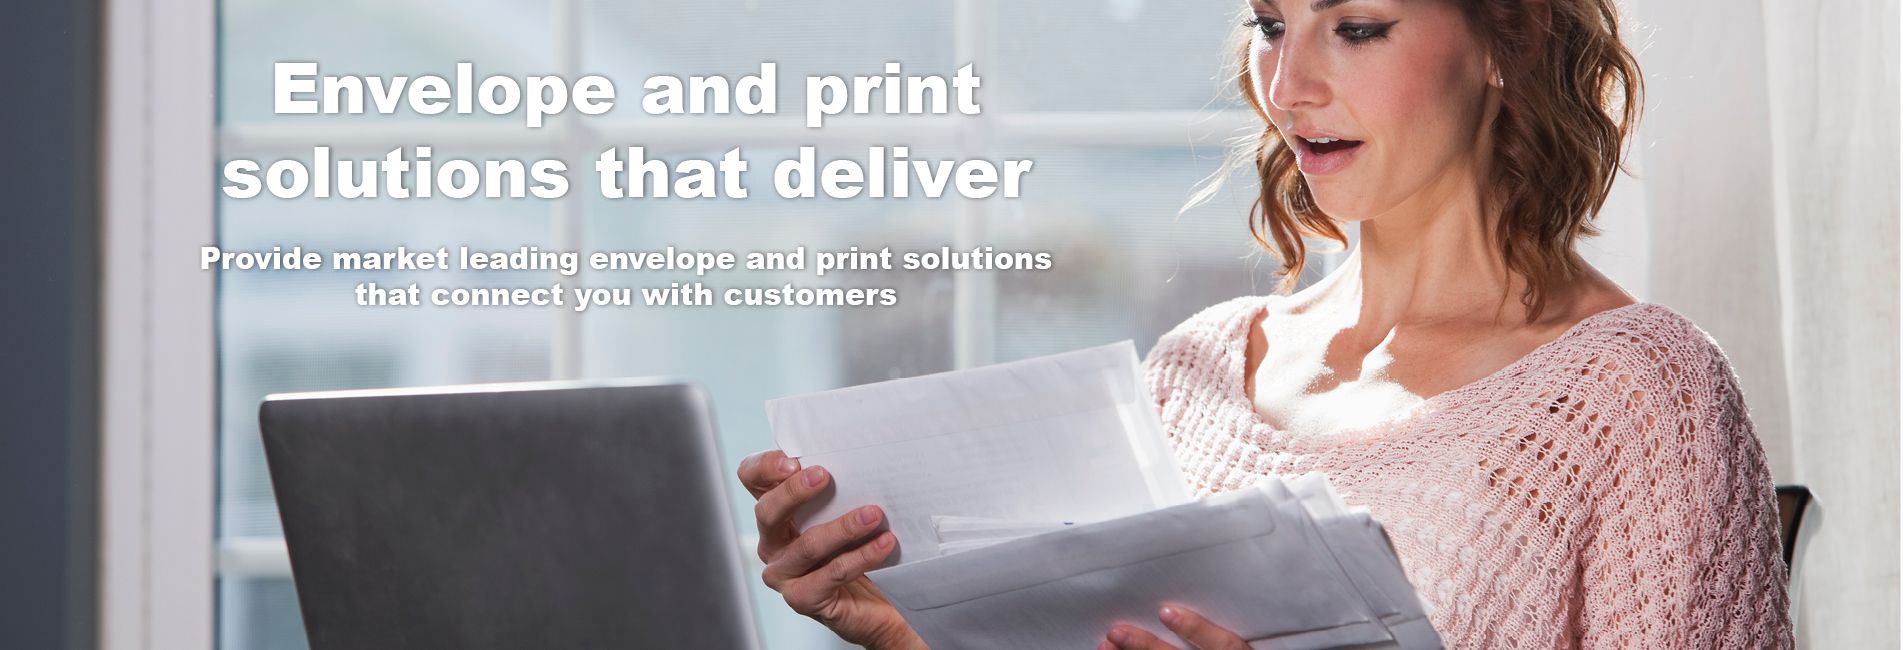 Envelope and print solutions that deliver